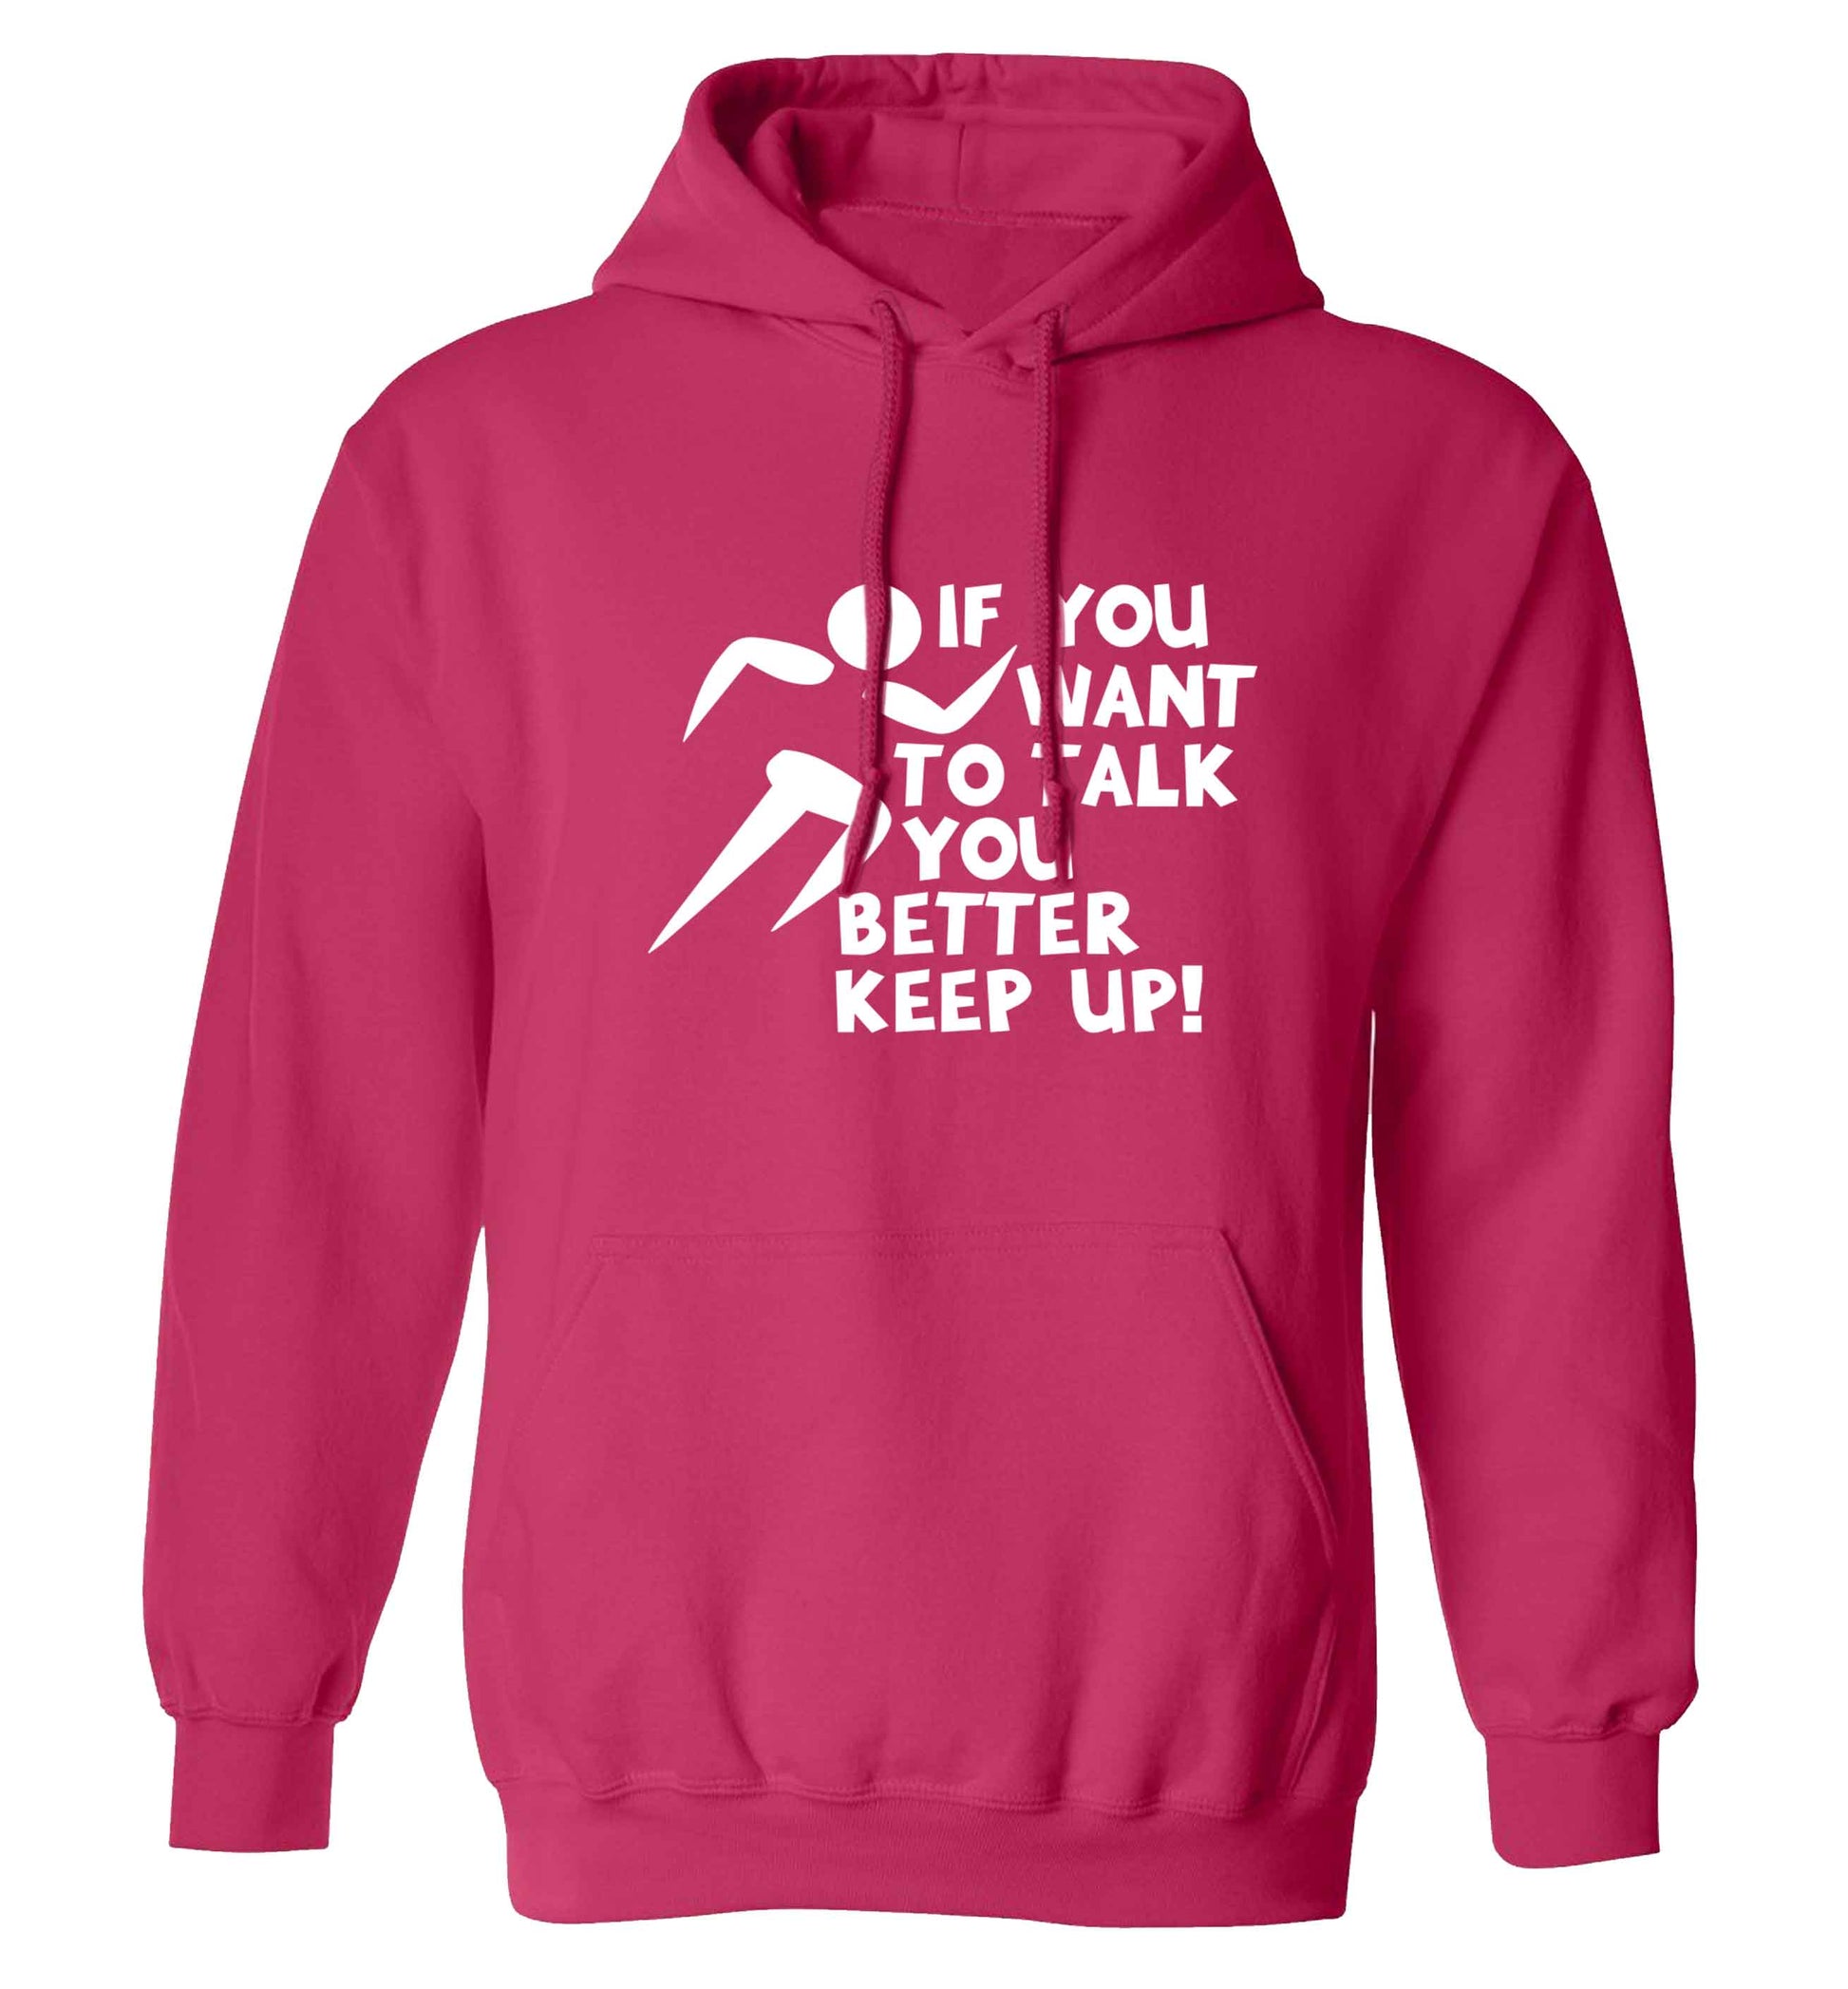 If you want to talk you better keep up! adults unisex pink hoodie 2XL